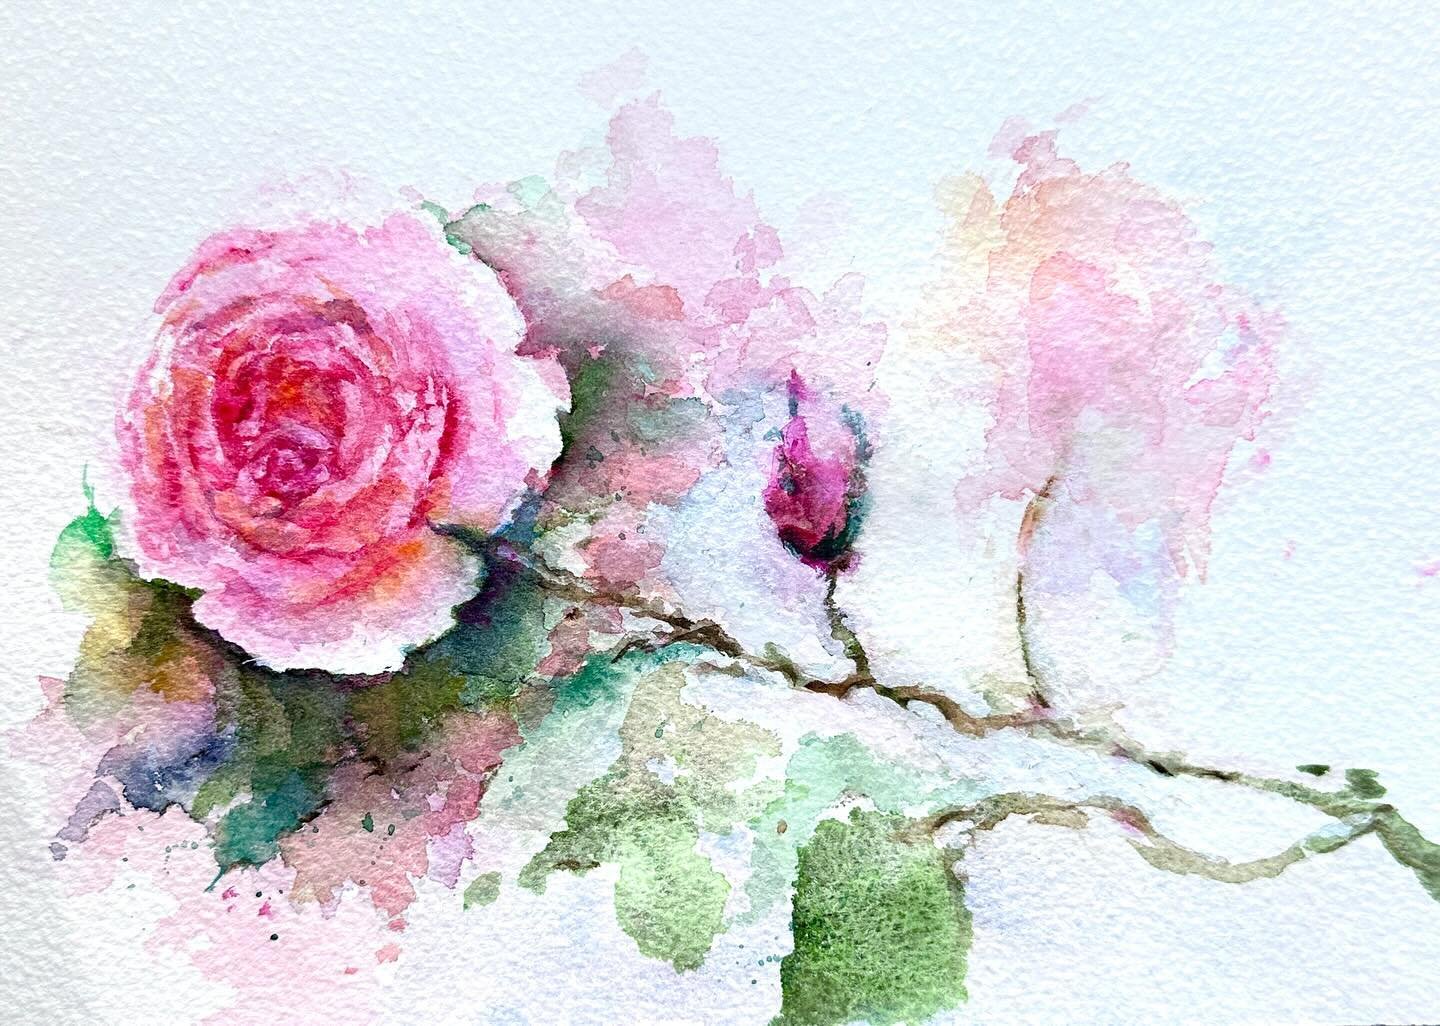 I've had a happy day today in my sunny studio, painting roses 🌹 Happy Friday! 

#watercolourartist #watercolor #watercolour #watercolourpainting #watercolorpainting #flowerpainting #floralpainting #watercolourist #watercolorillustration #watercolorf